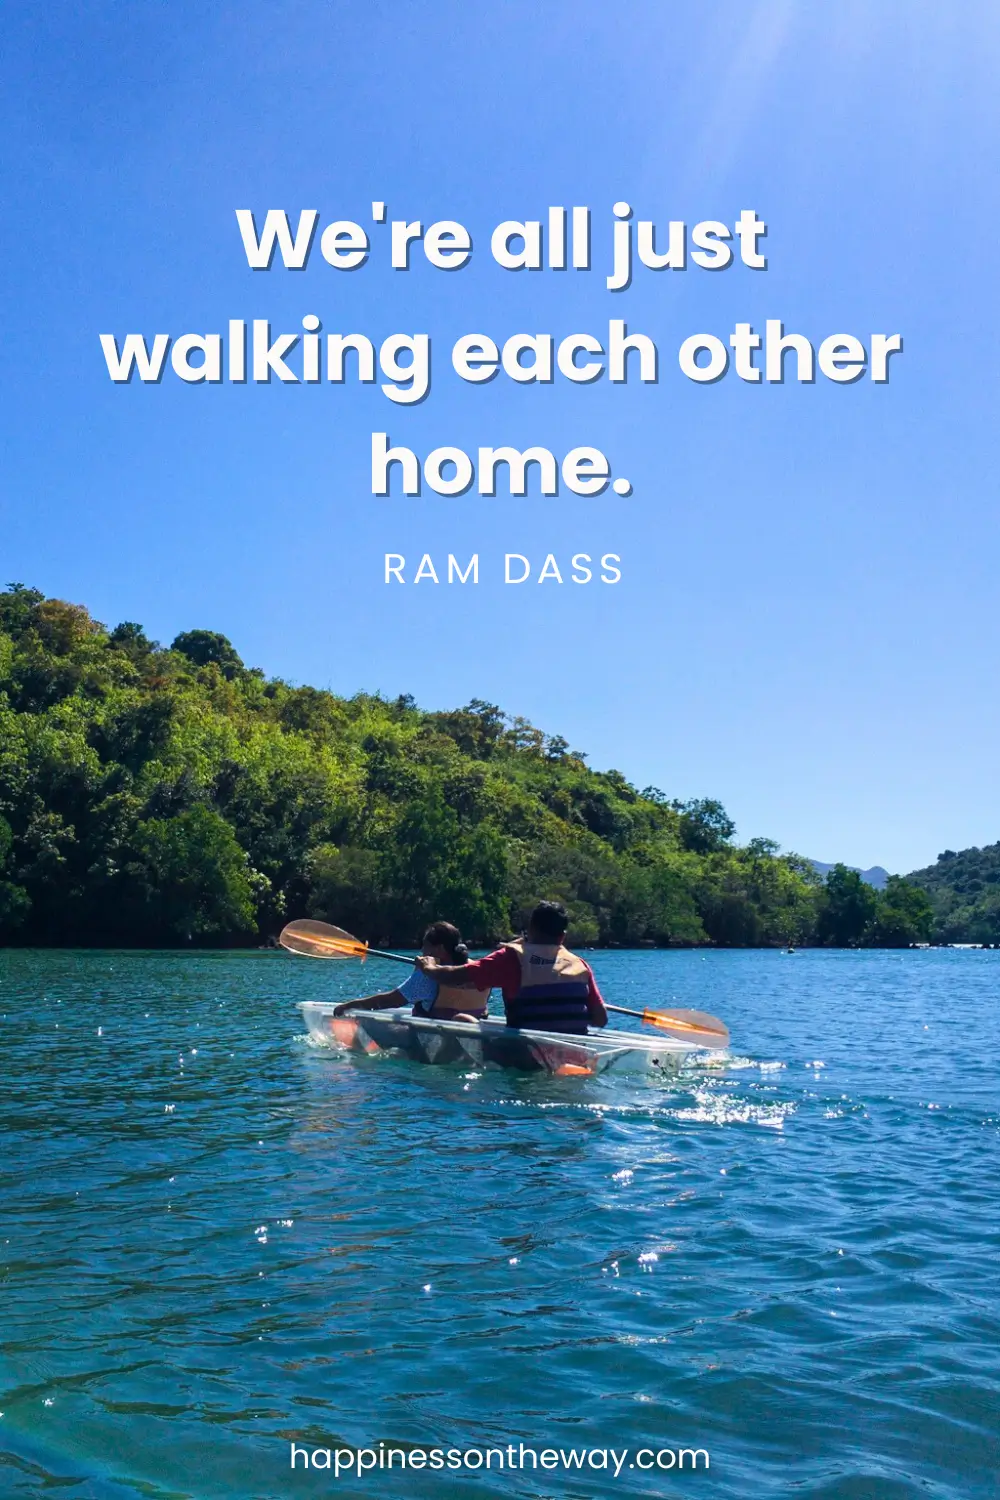 My parents kayaking in a tranquil blue lake surrounded by lush greenery under a clear sky, with the profound Ram Dass quote 'We're all just walking each other home.'